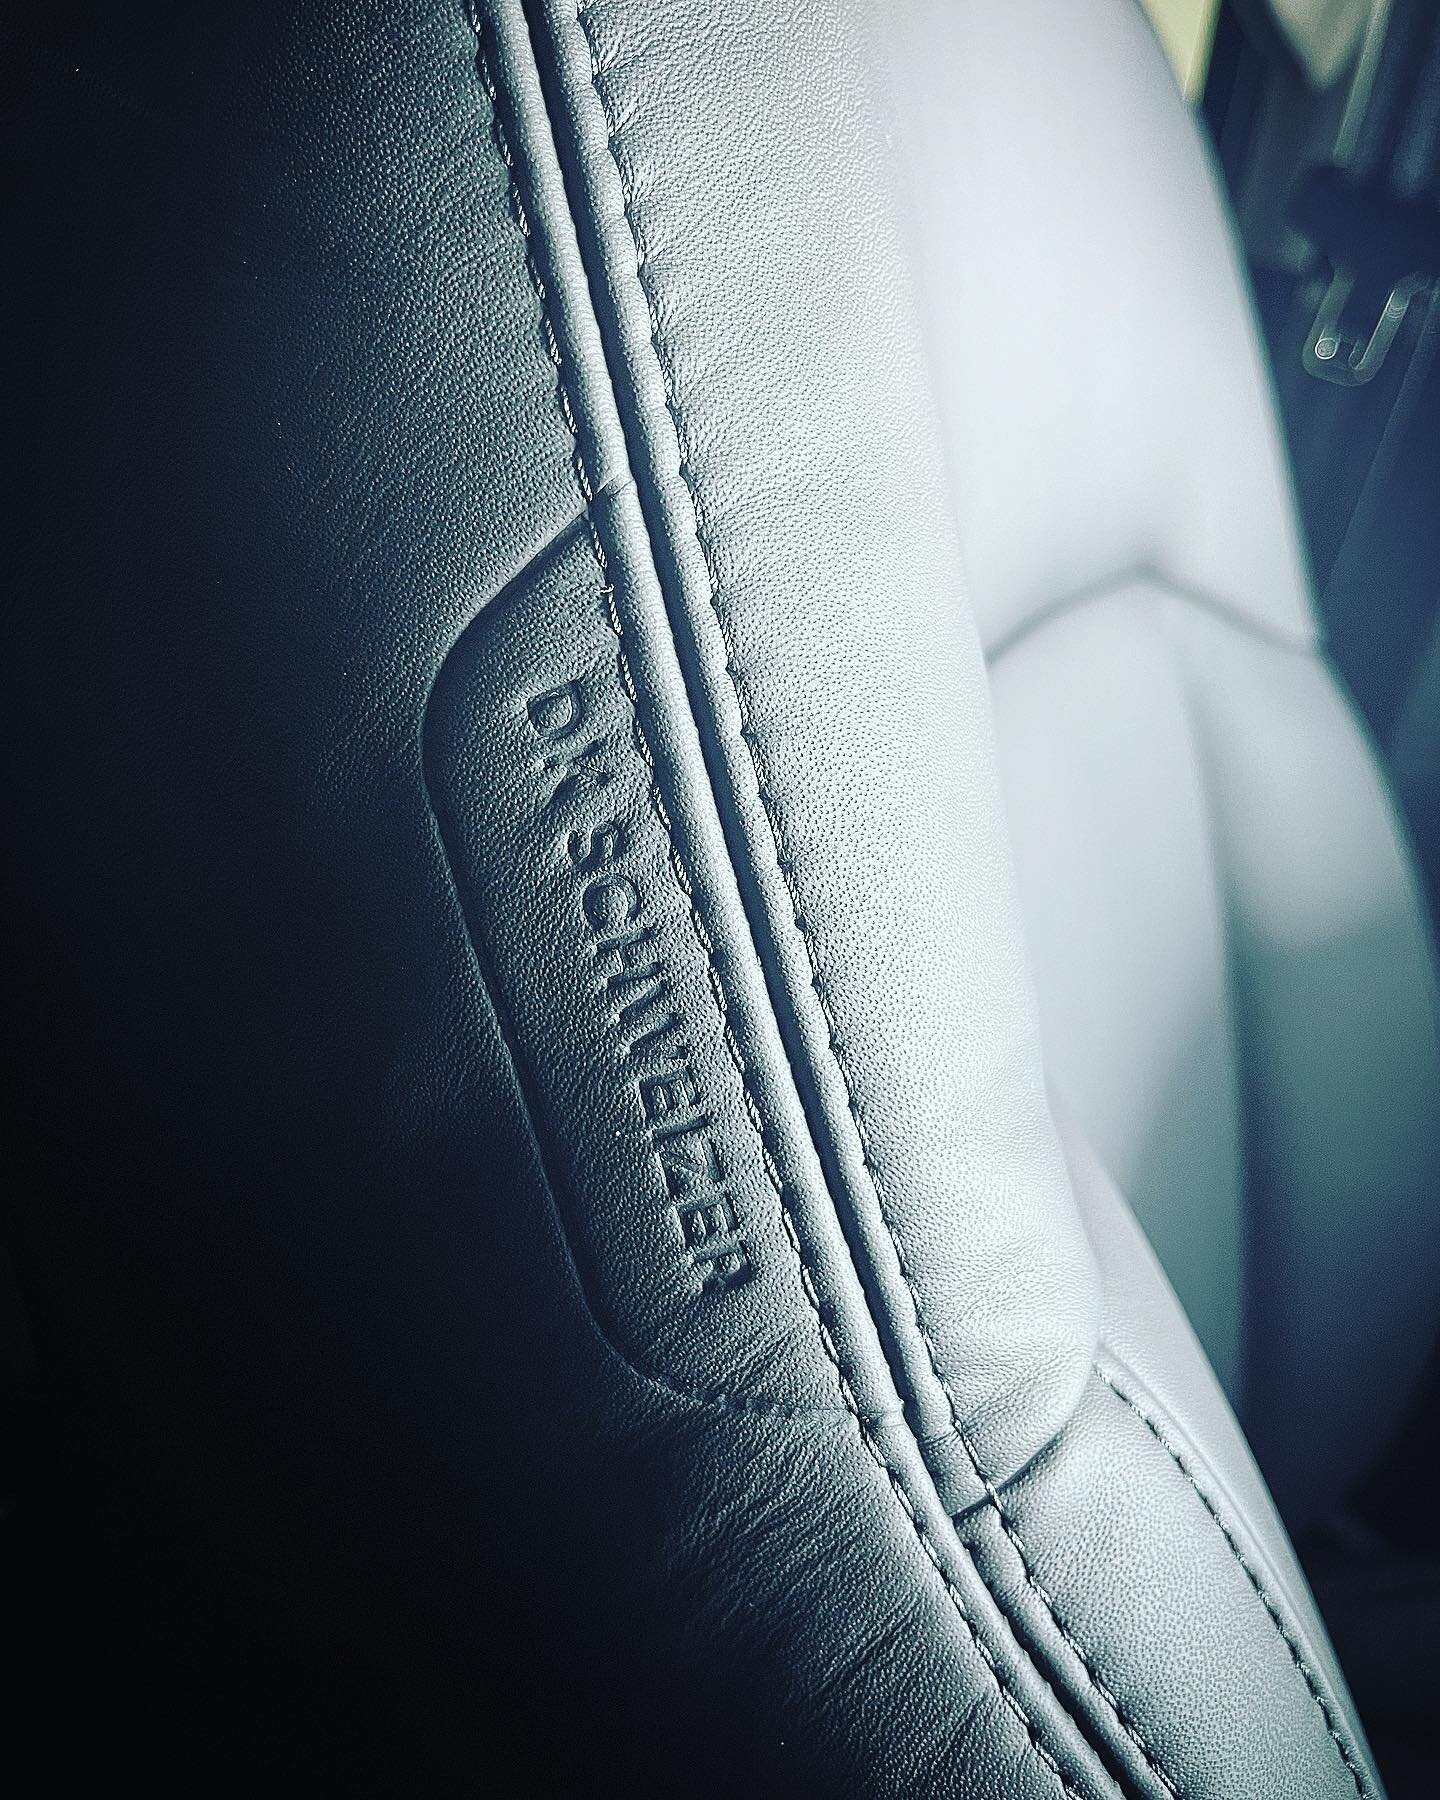 Car Leather Seats & Upholstery Care Tips